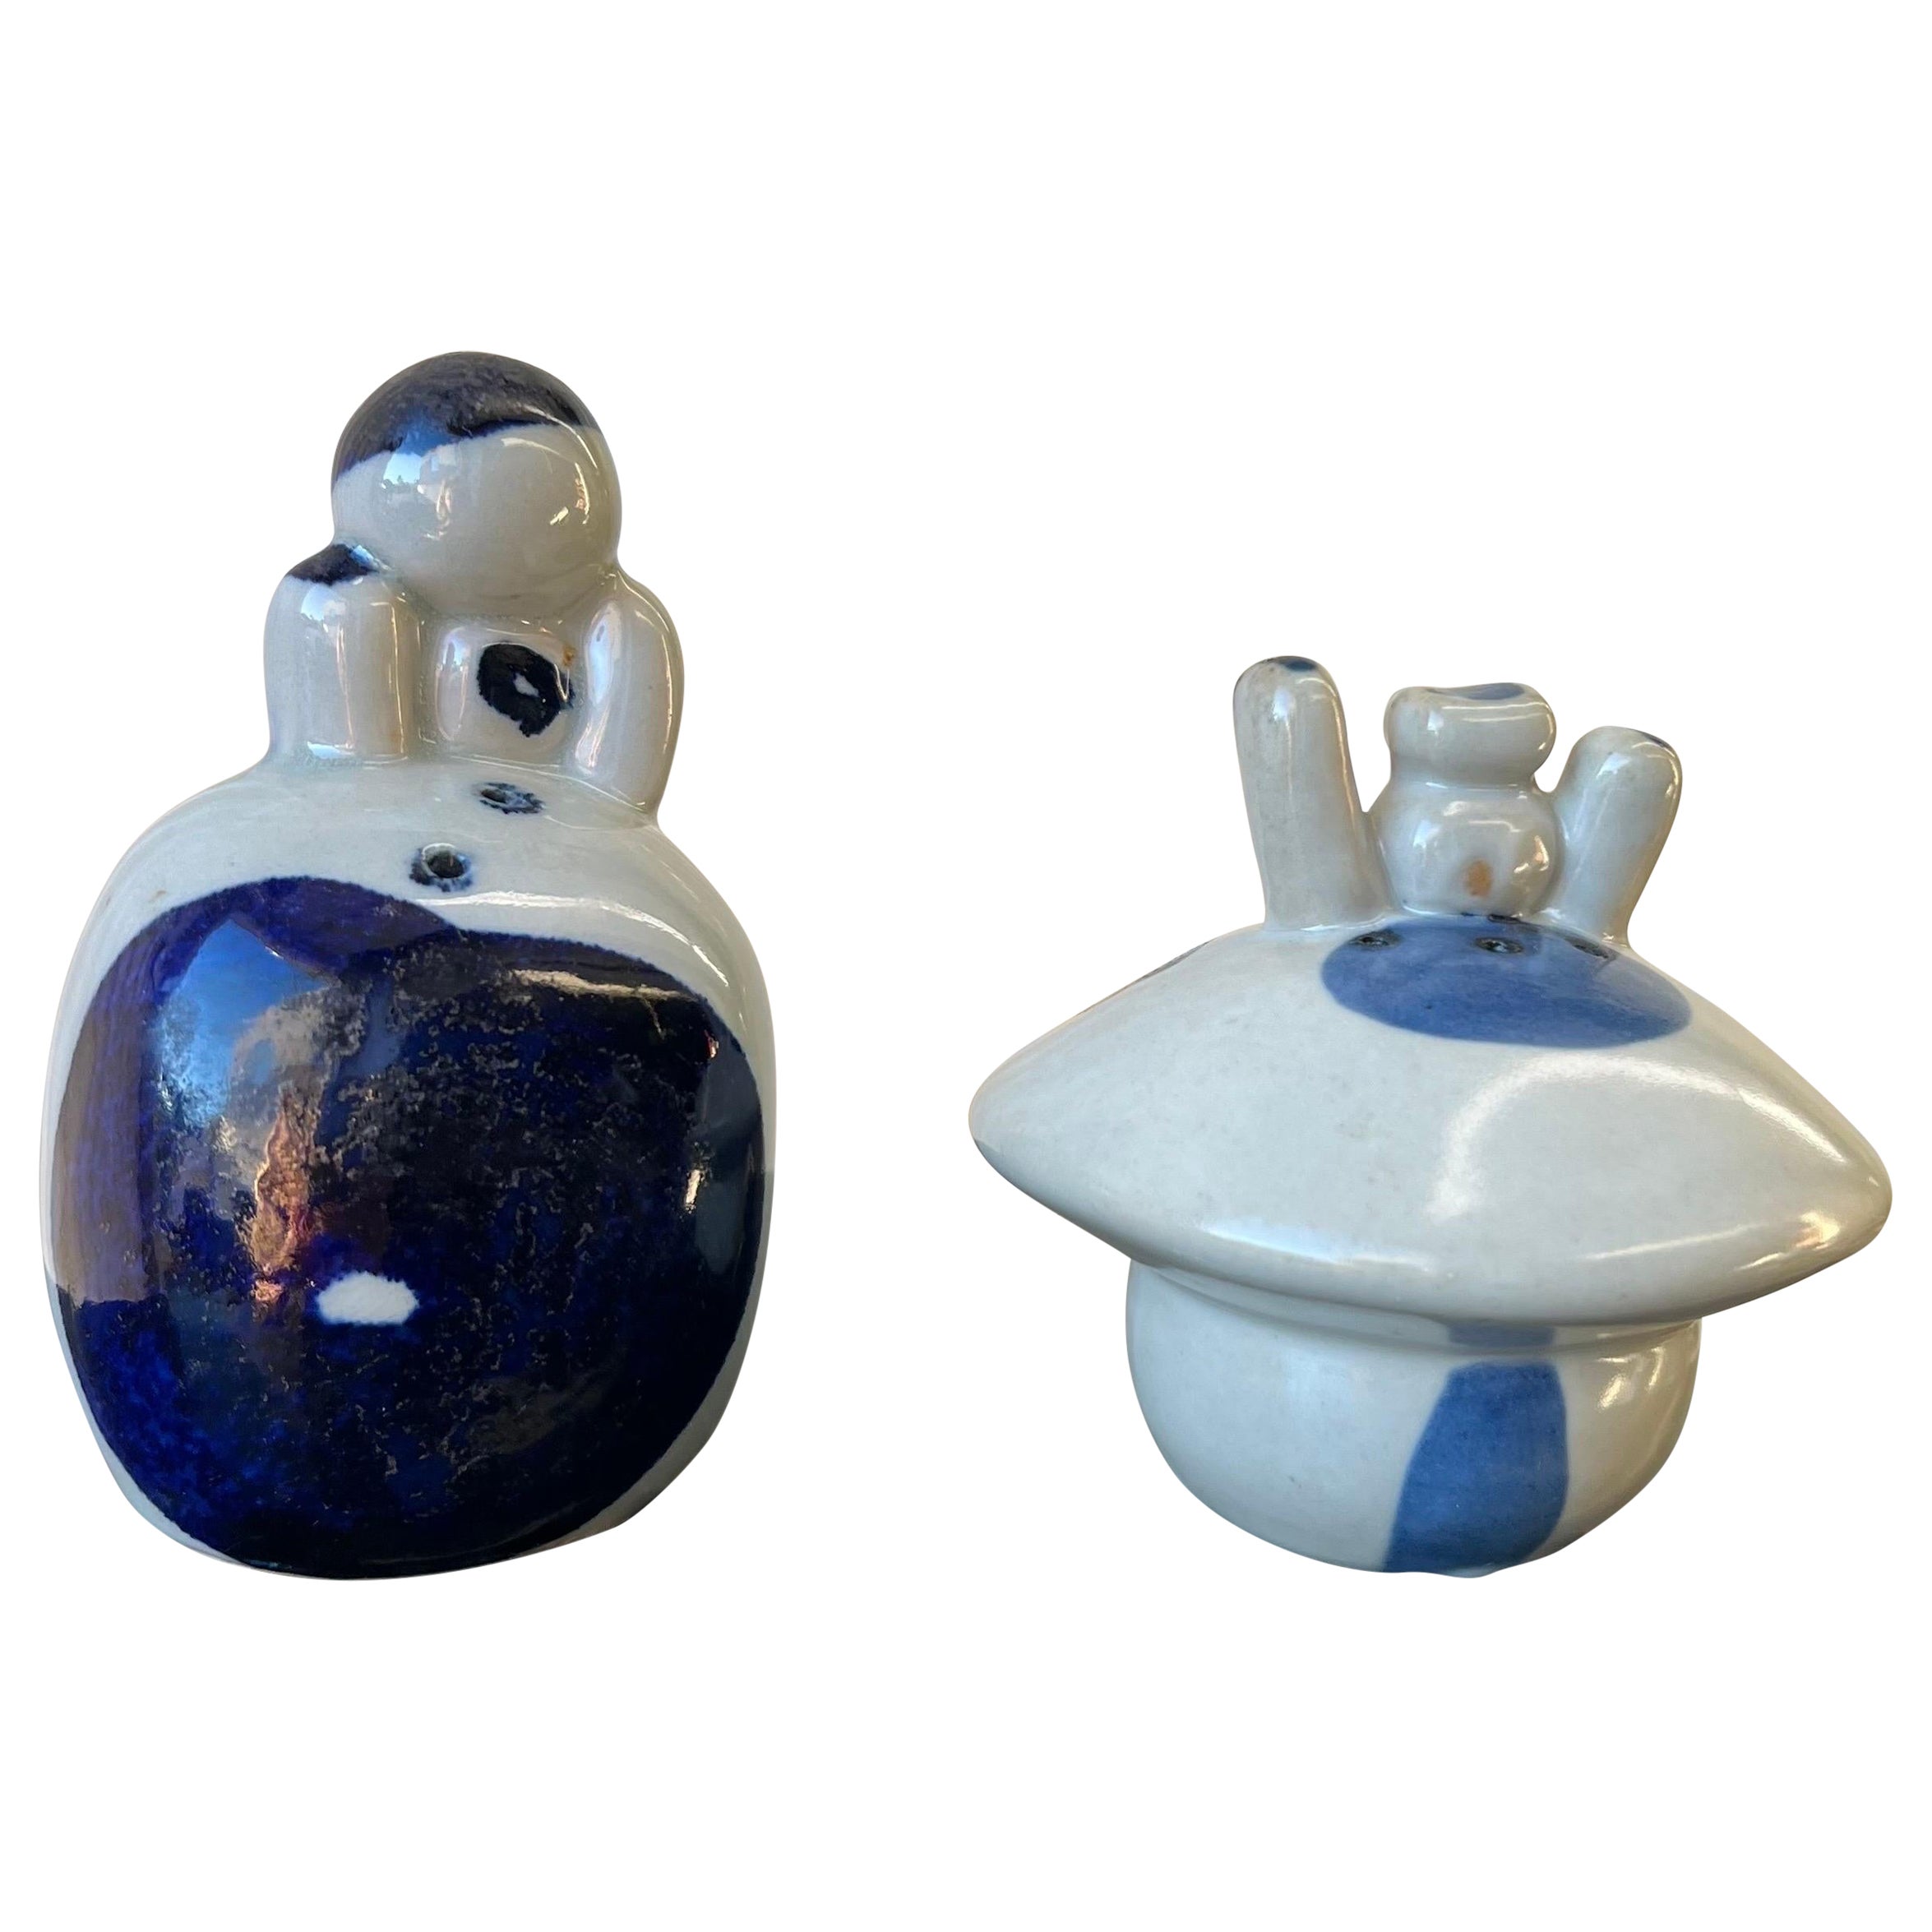 Vintage Figurative Studio Pottery Salt and Pepper Shakers - a Pair For Sale